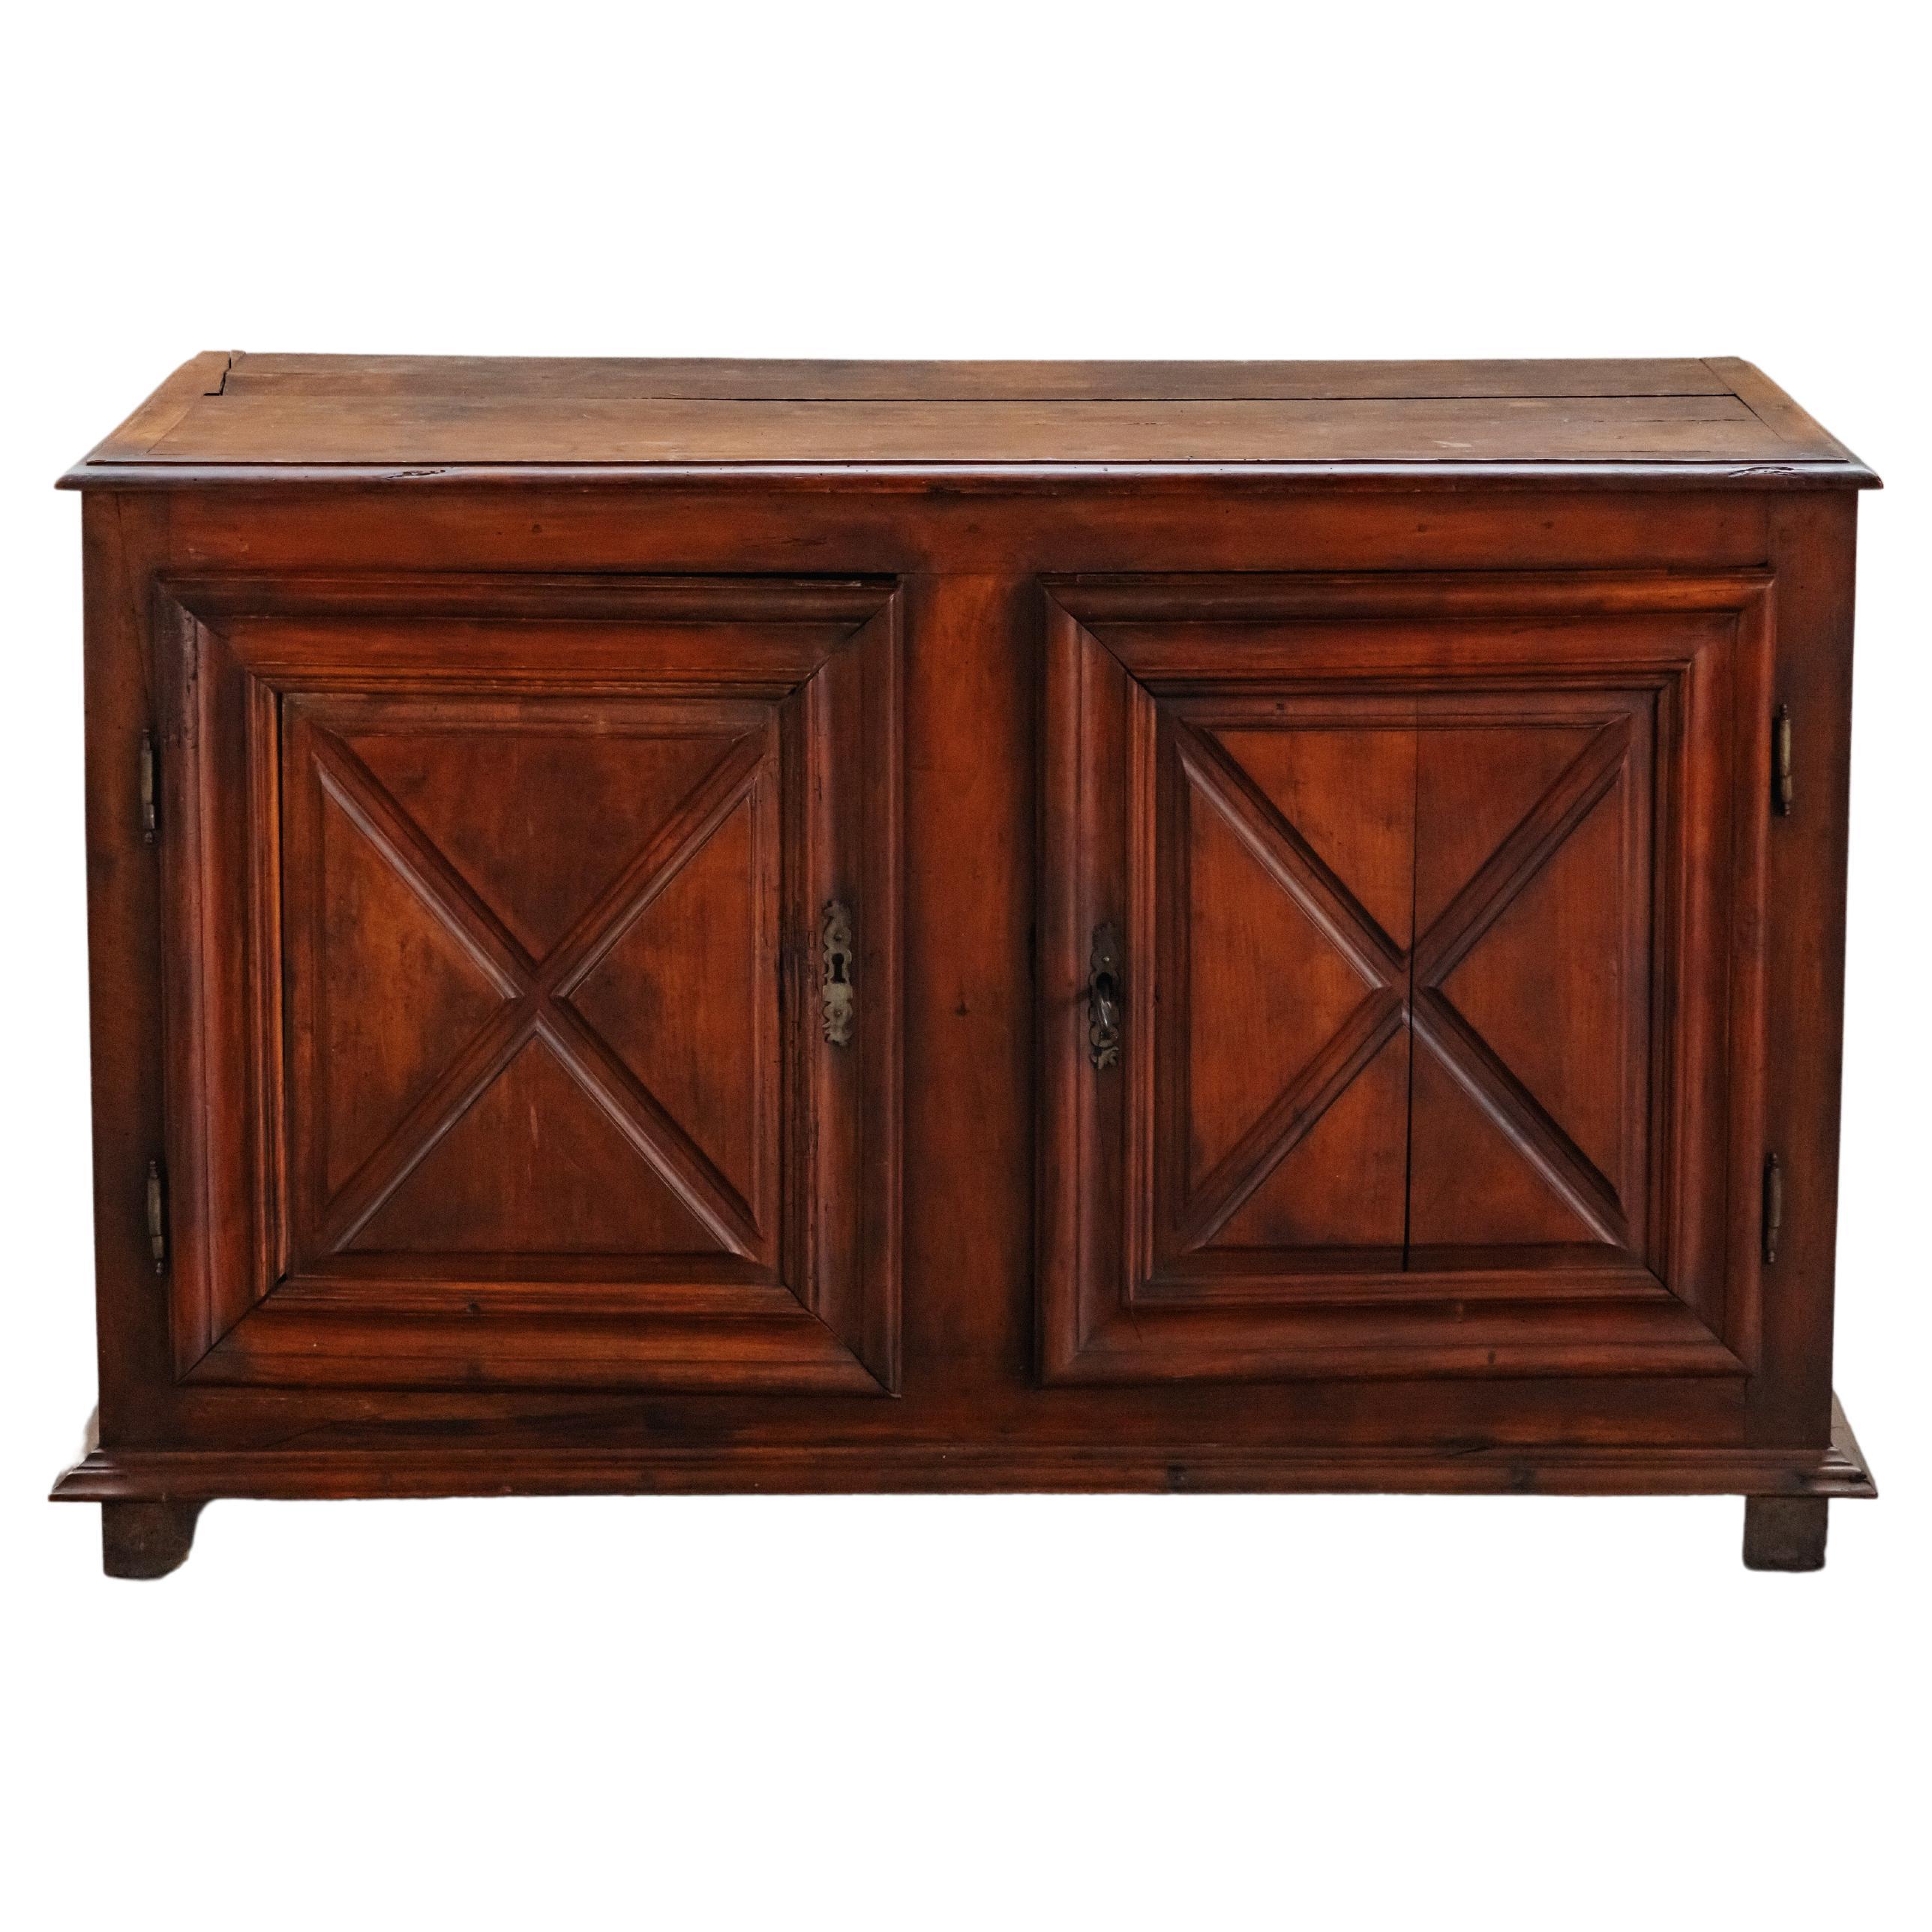 Early French Sideboard From France, Circa 1820